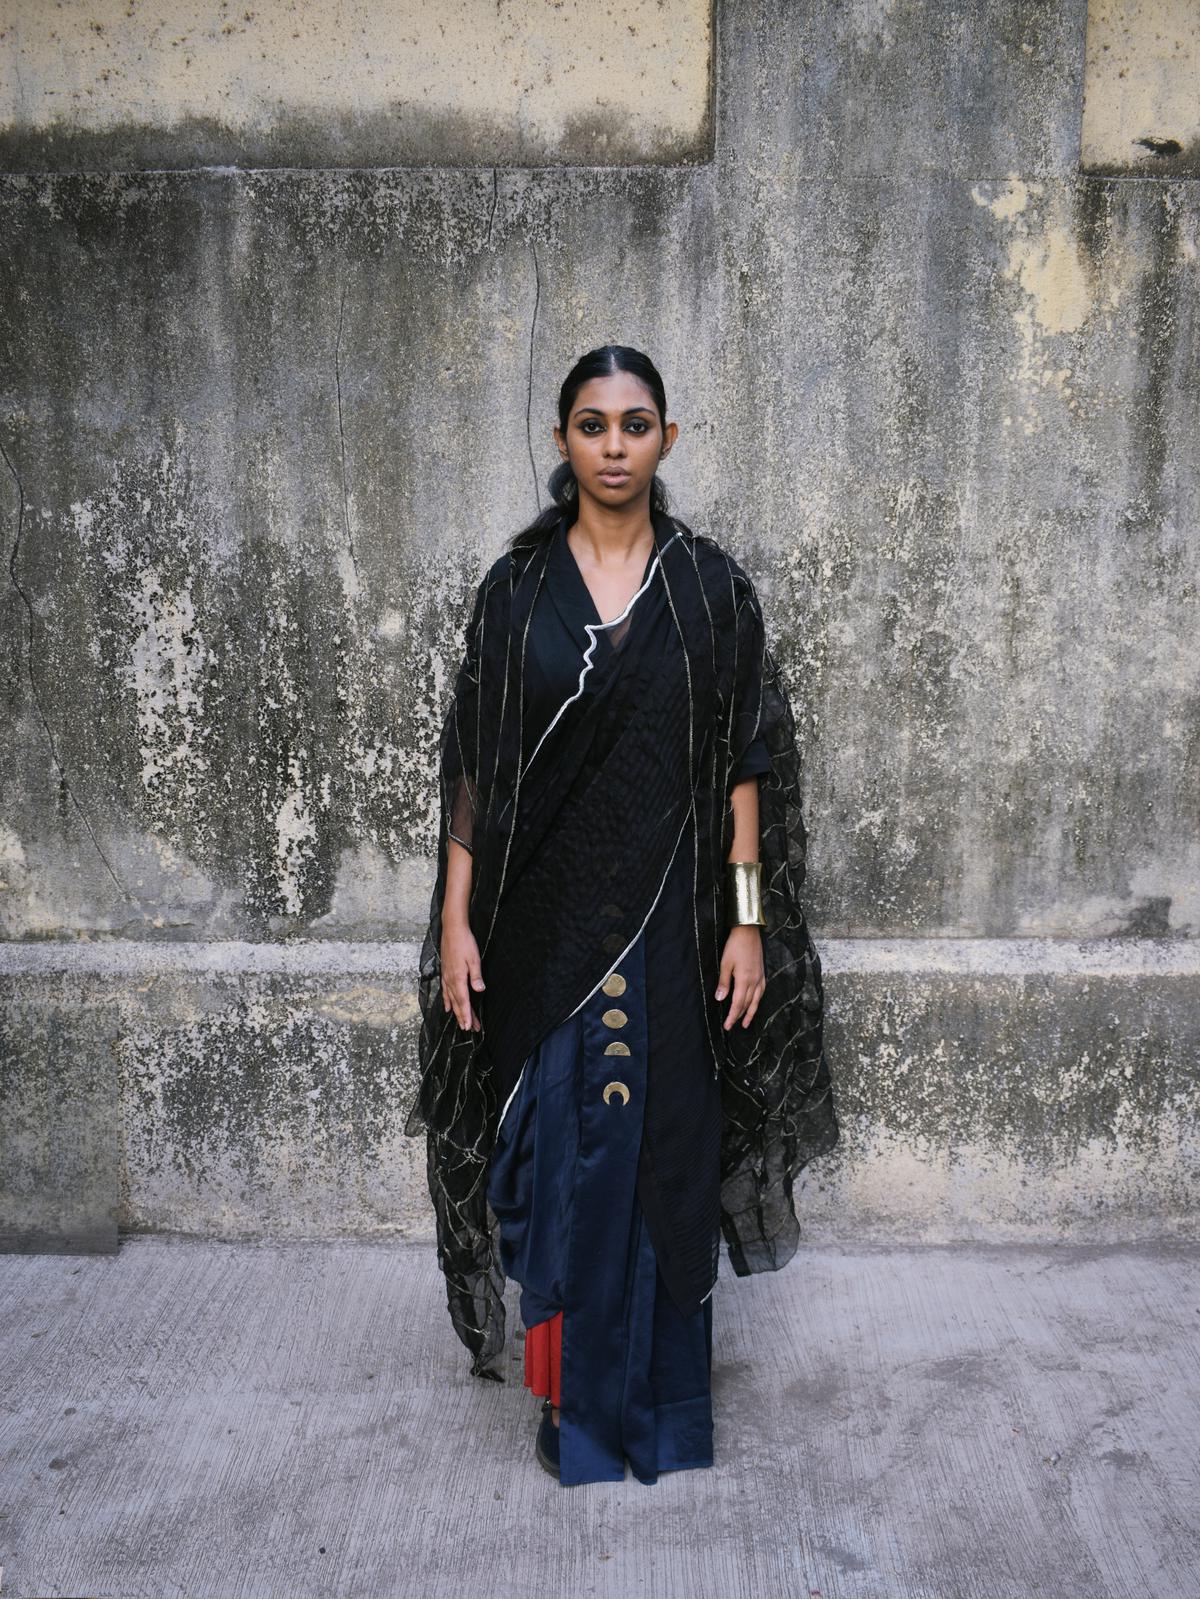 An outfit from J’aipour Homecoming that uses secondhand shirts from Mumbai’s Chor Bazaar 